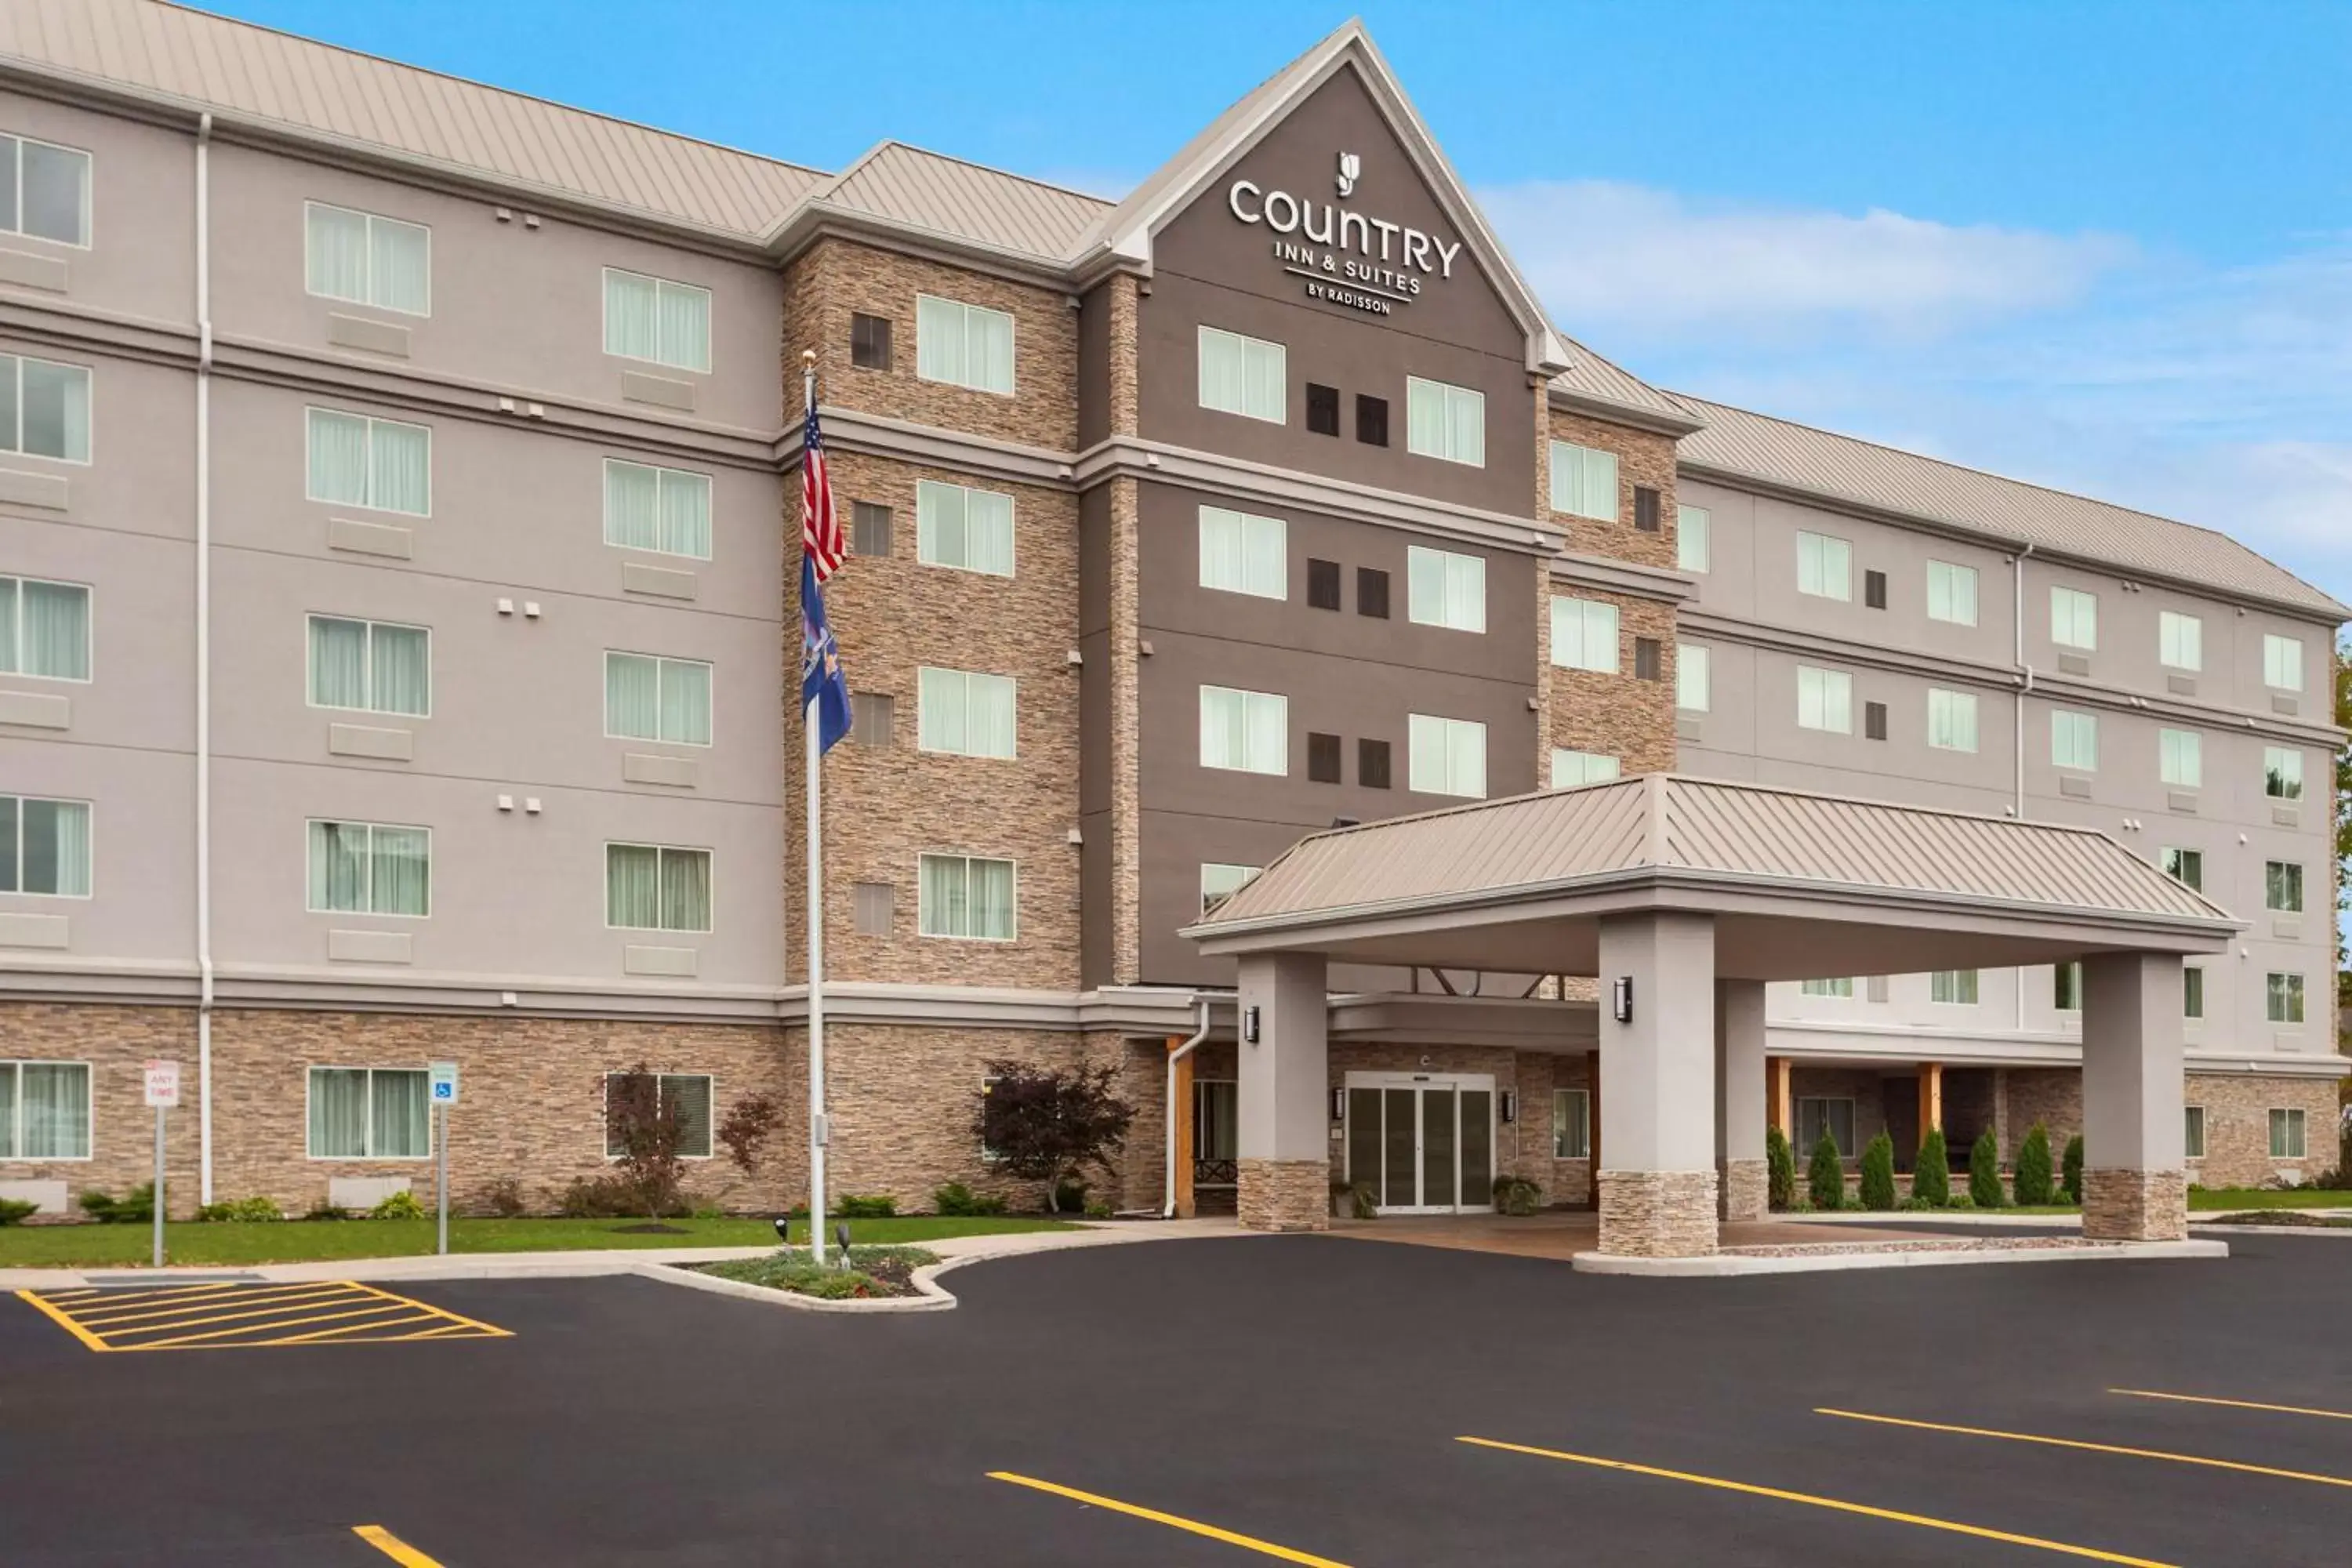 Property building in Country Inn & Suites Buffalo South I-90, NY